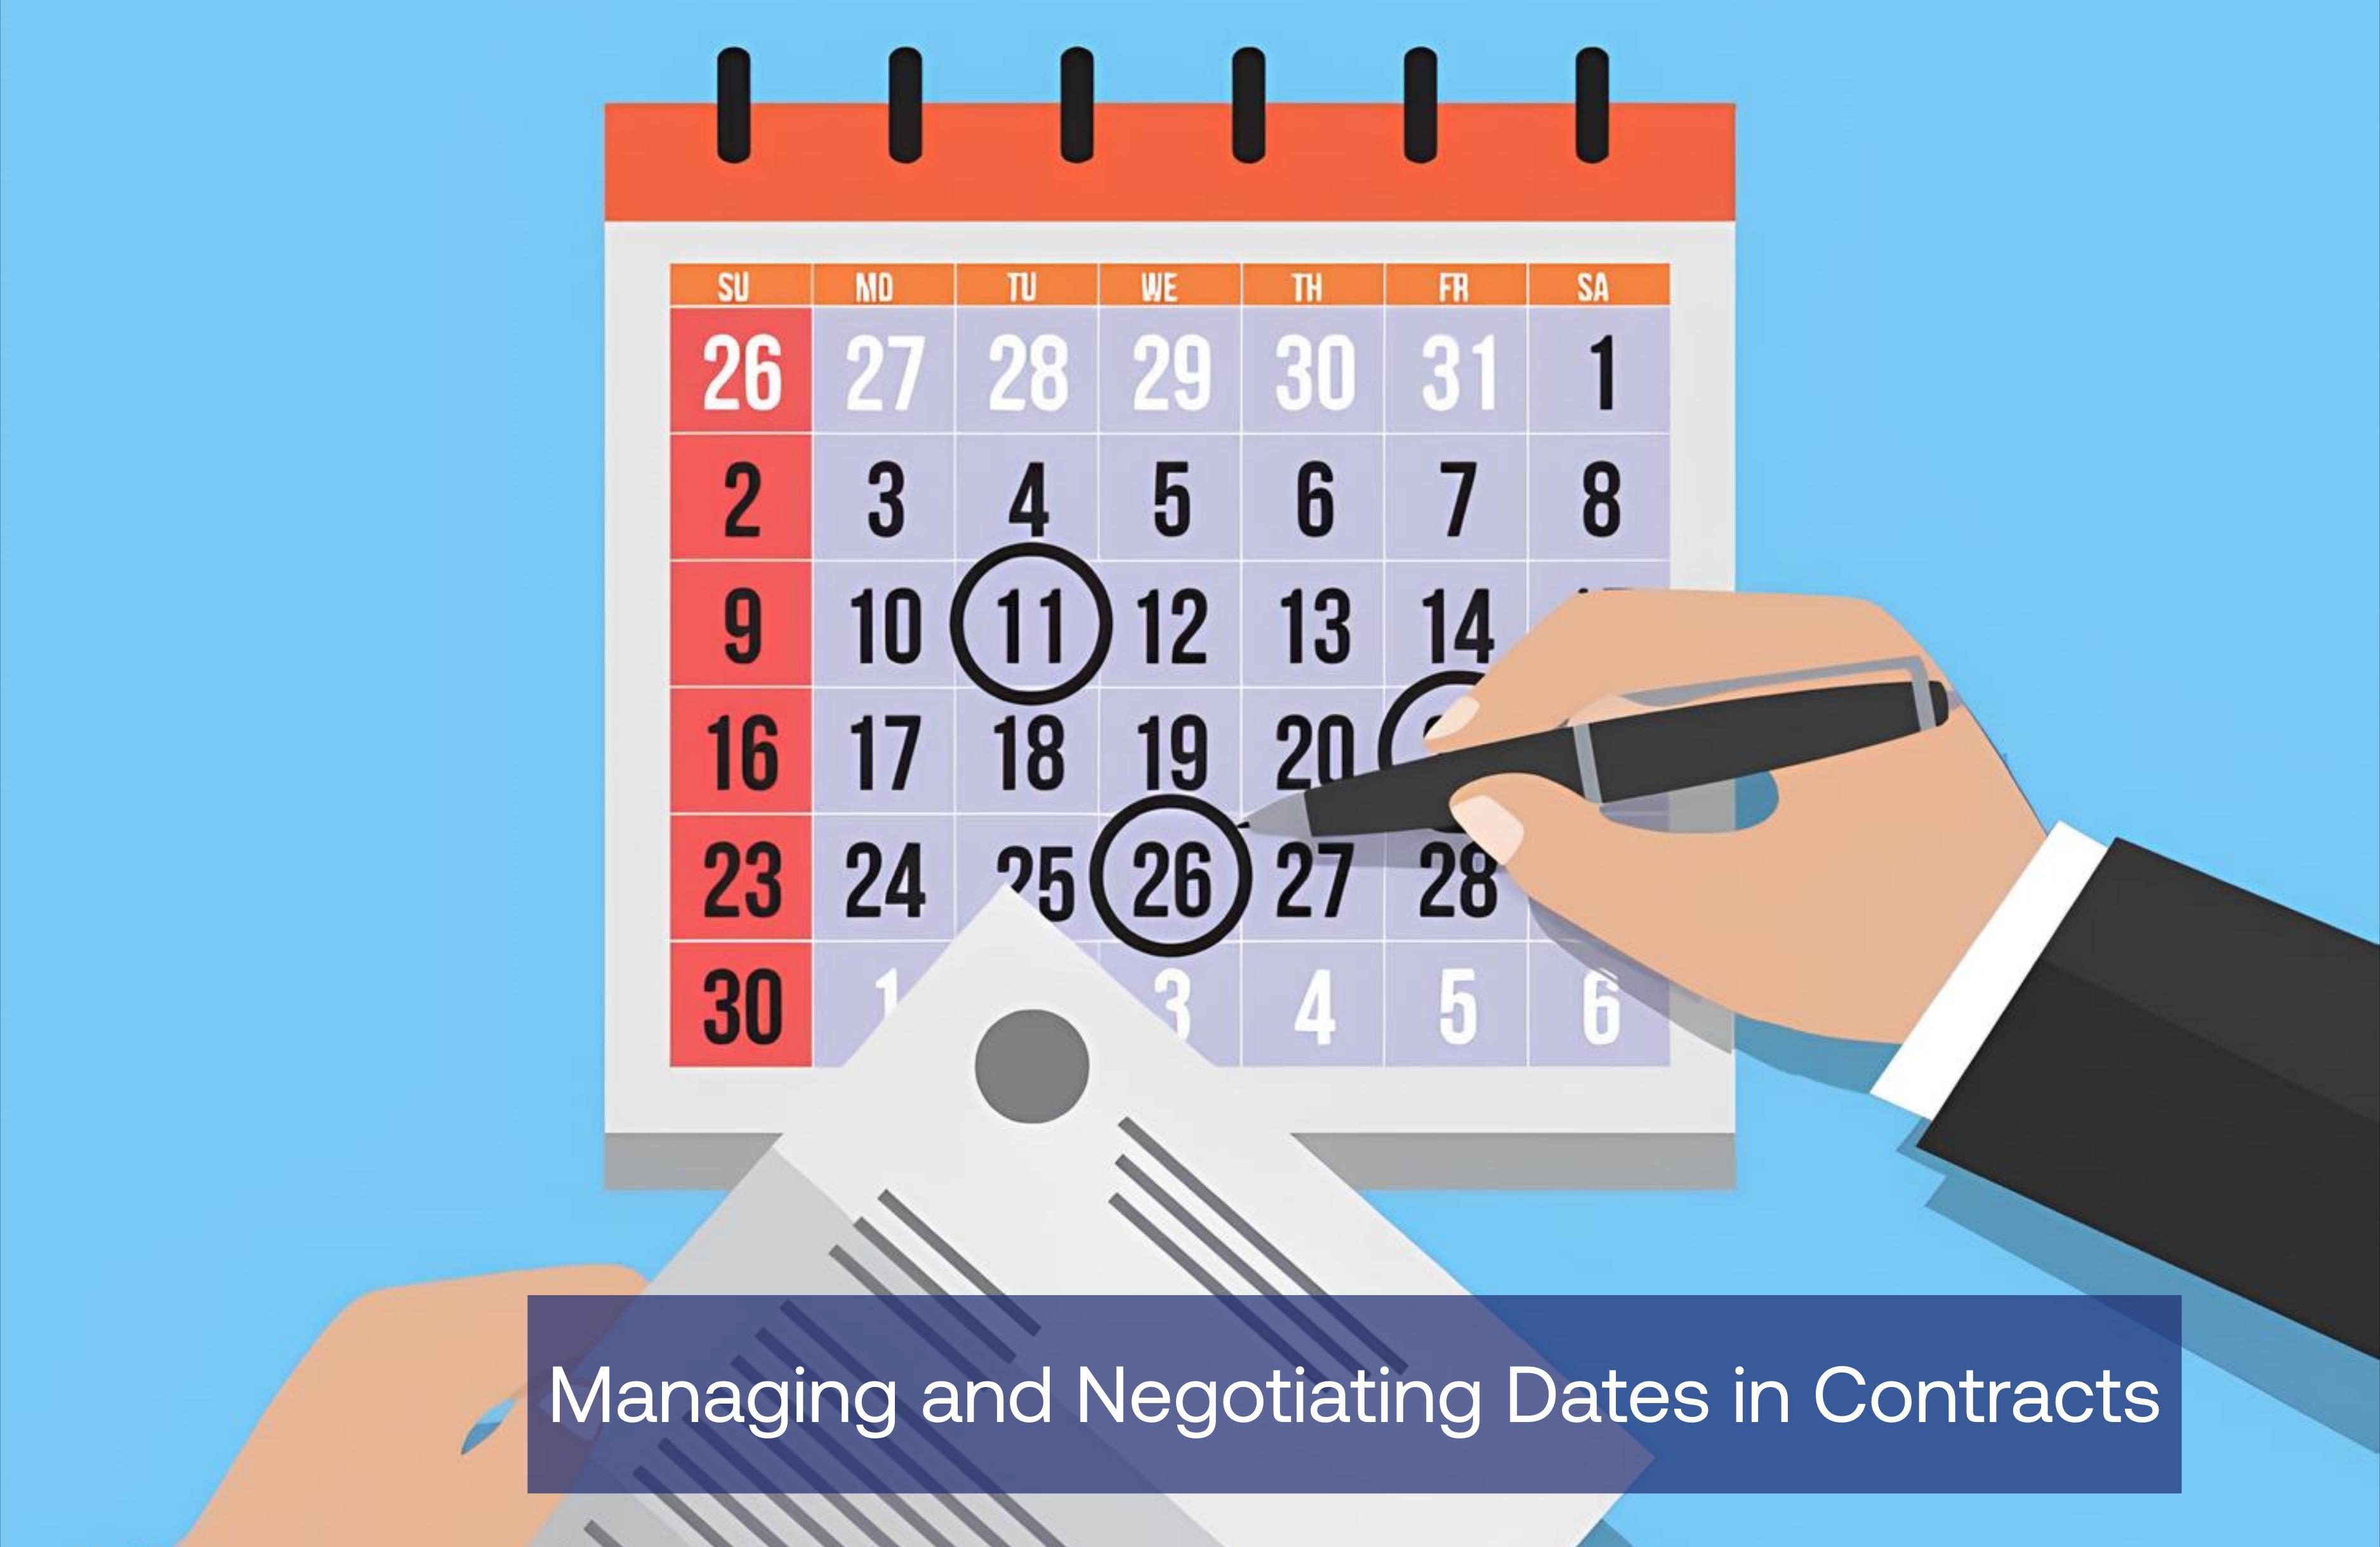 Managing and Negotiating Dates in Contracts